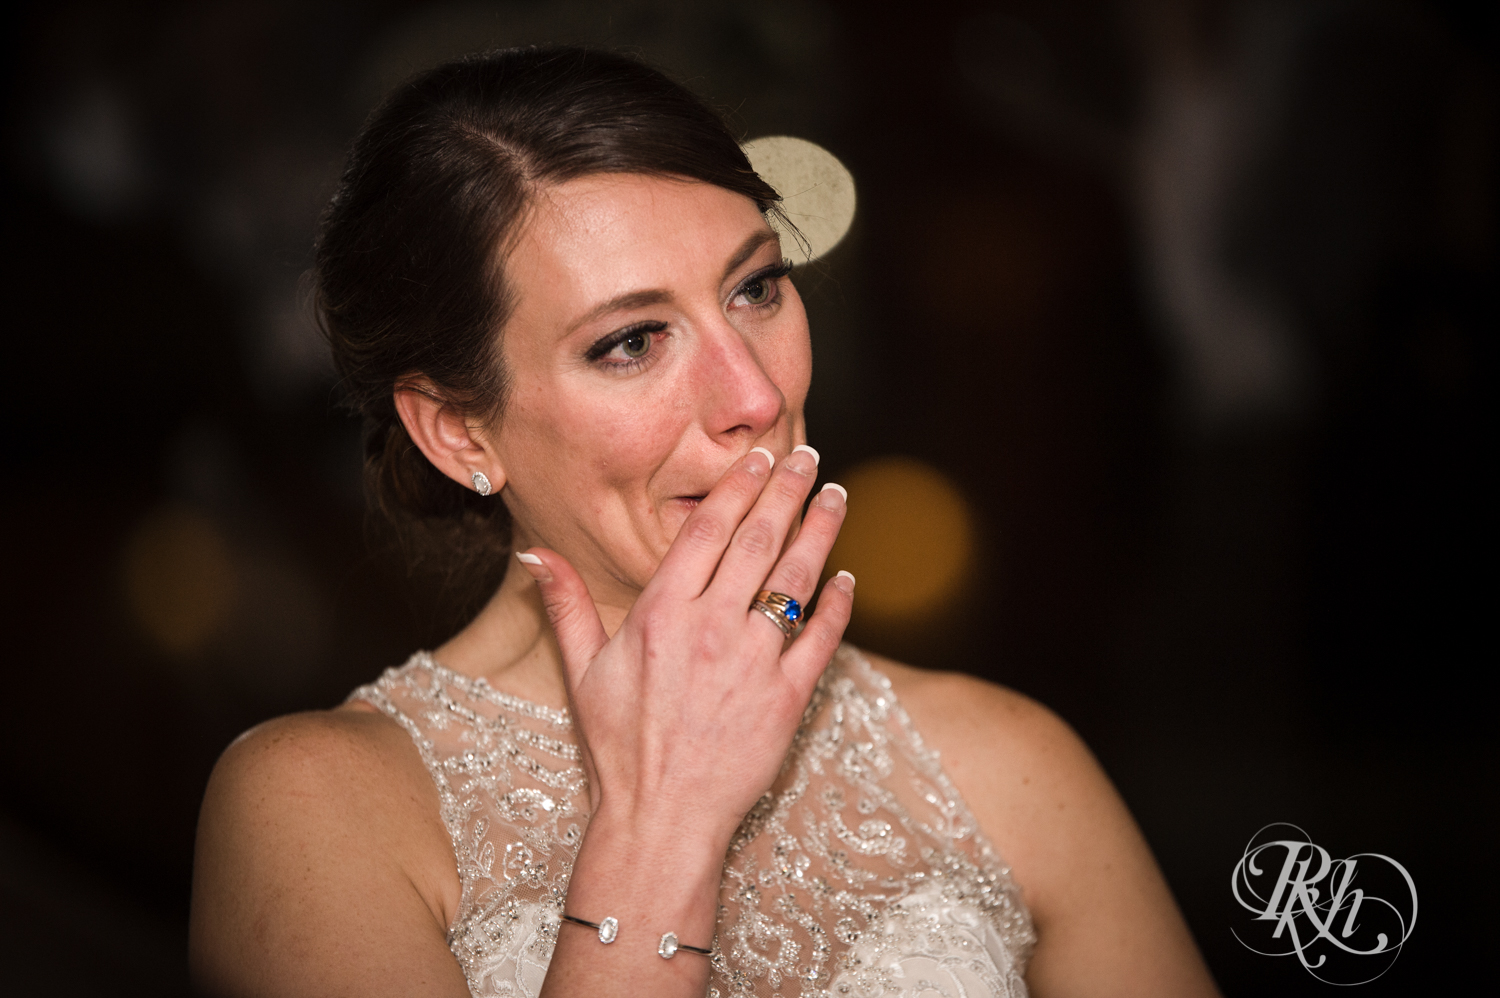 Bride cries during speeches at wedding reception at the Lumber Exchange Event Center in Minneapolis, Minnesota.